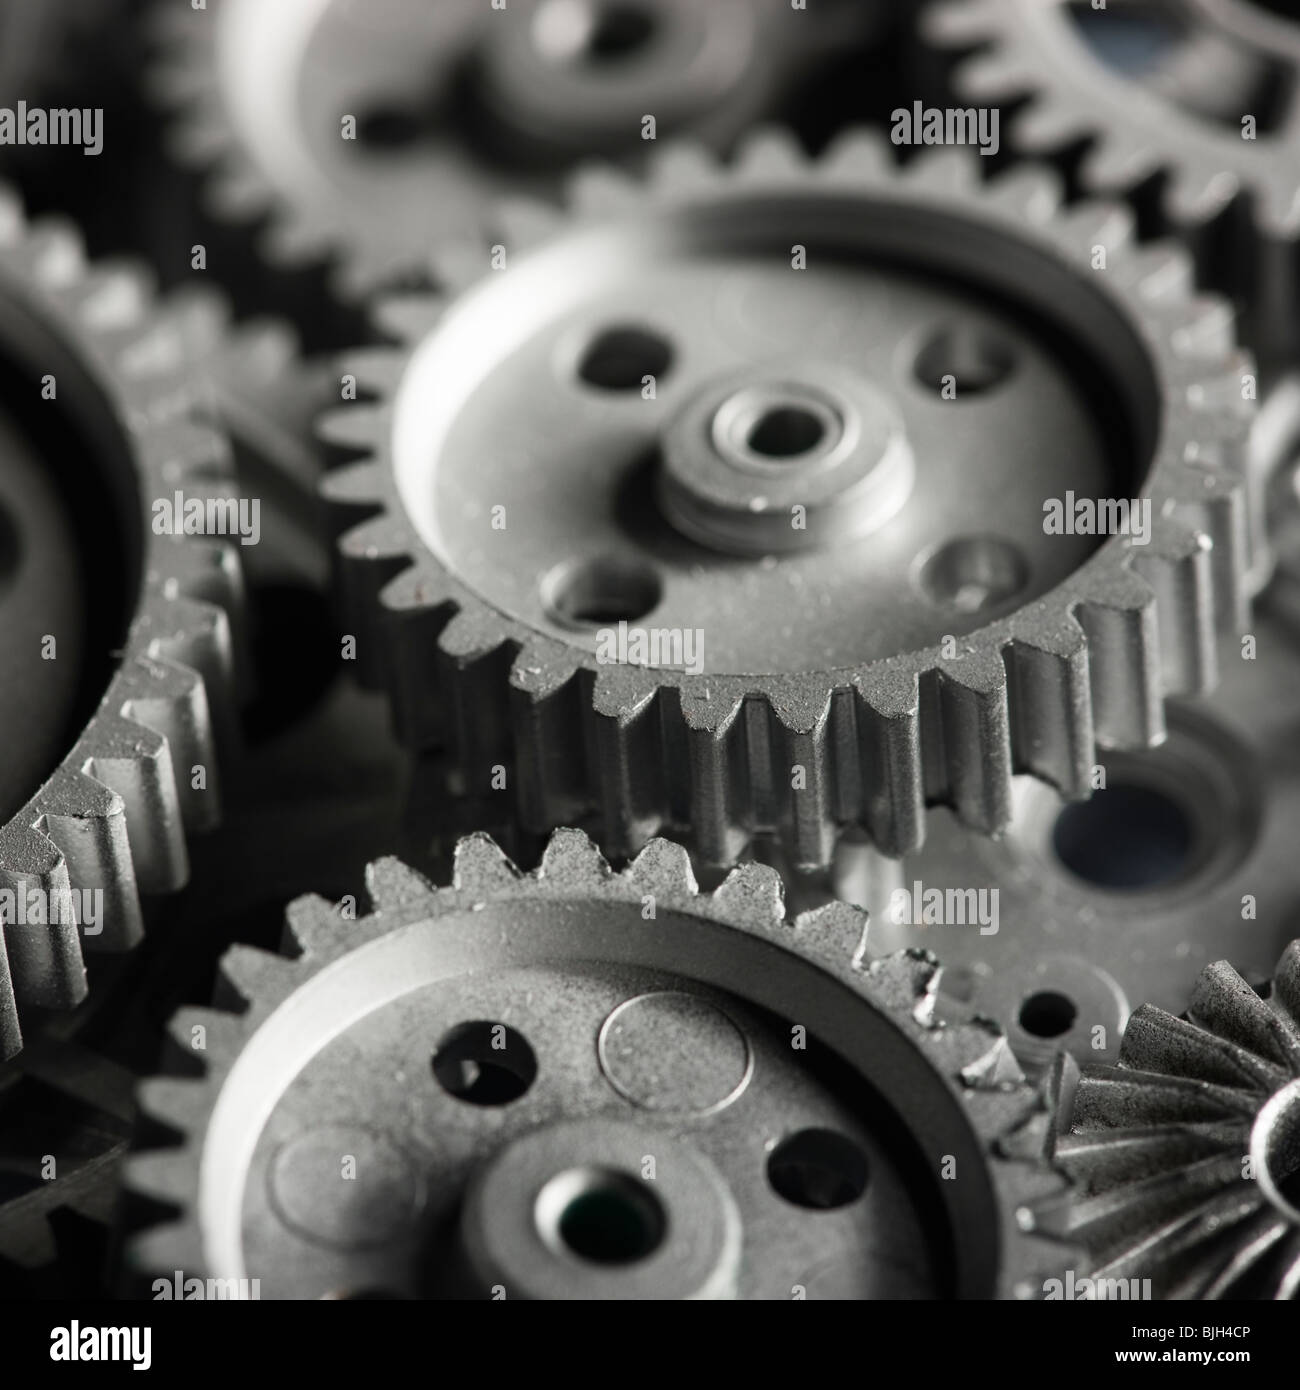 gears piled on top of gears Stock Photo